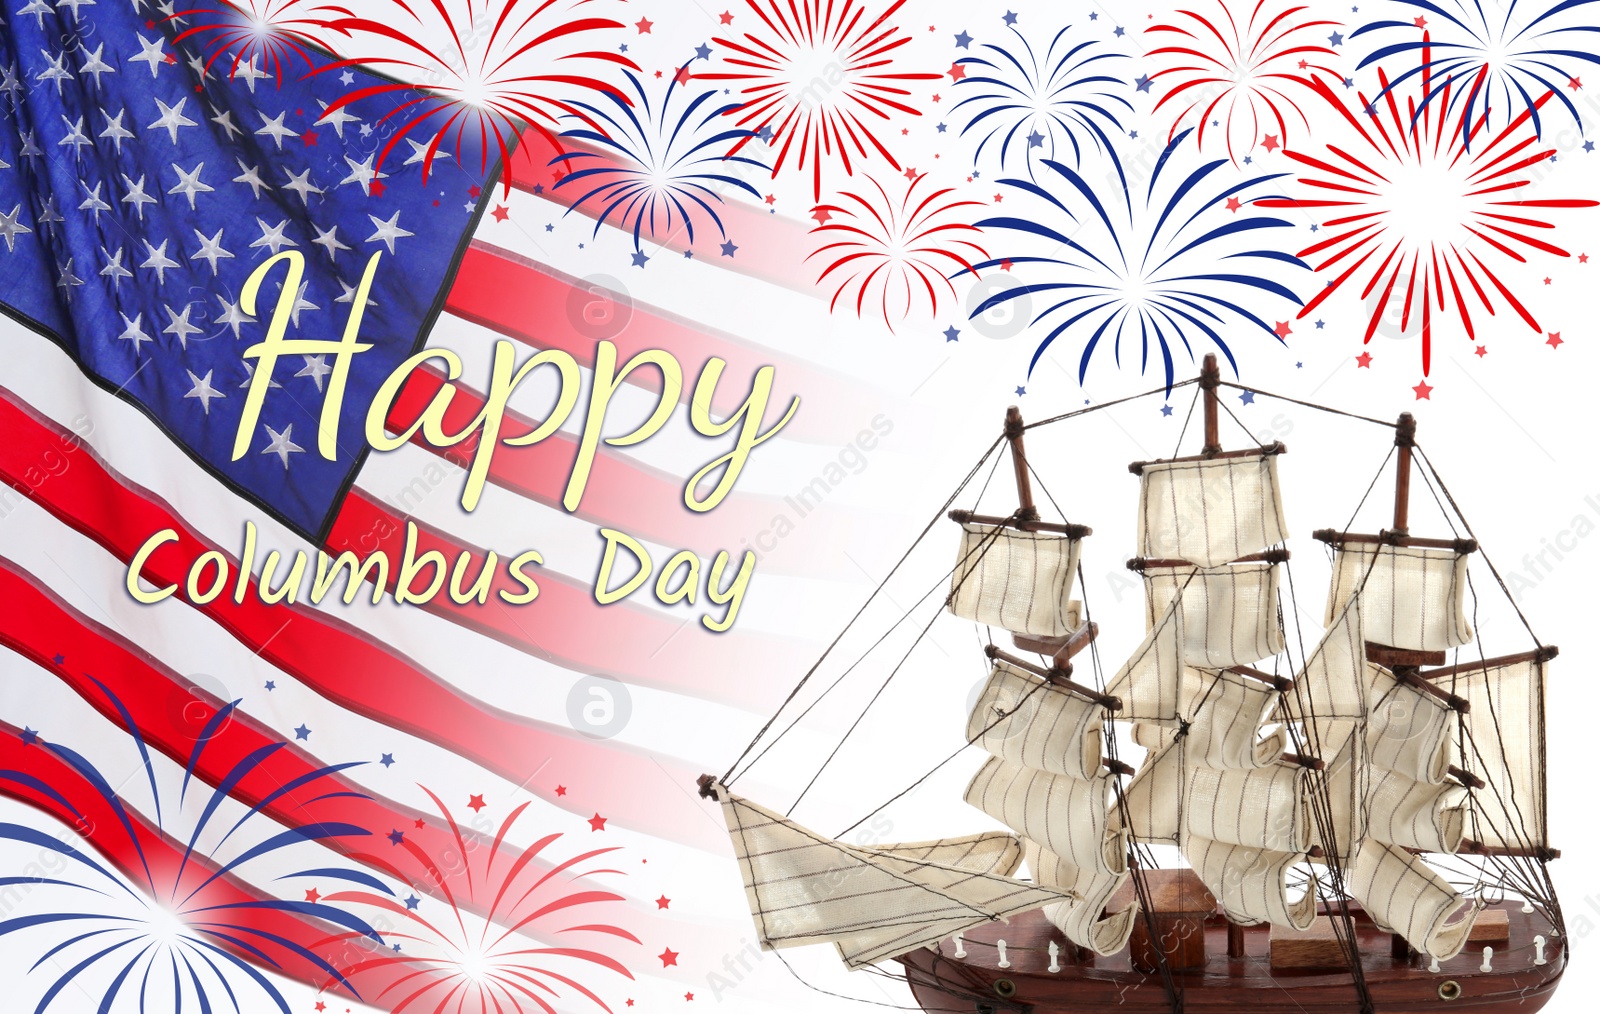 Image of Happy Columbus Day. American national flag with fireworks and ship on white background